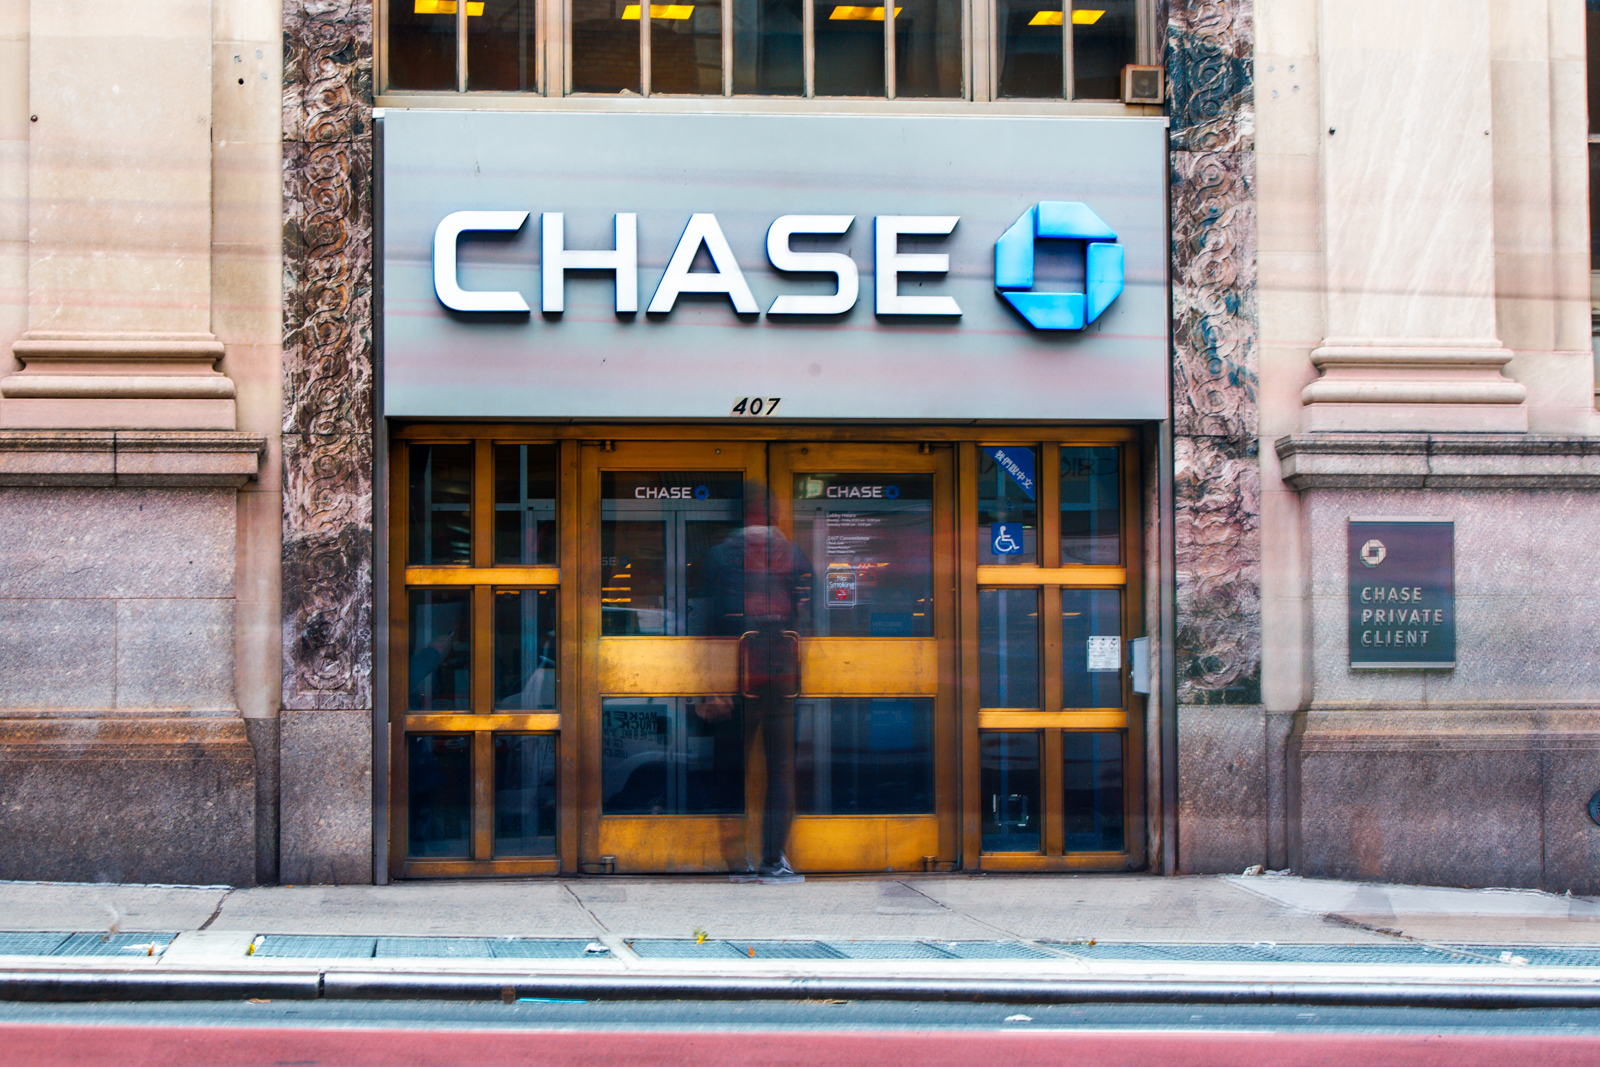 Chase credit cards - The minimum credit score you need for each card - featured image